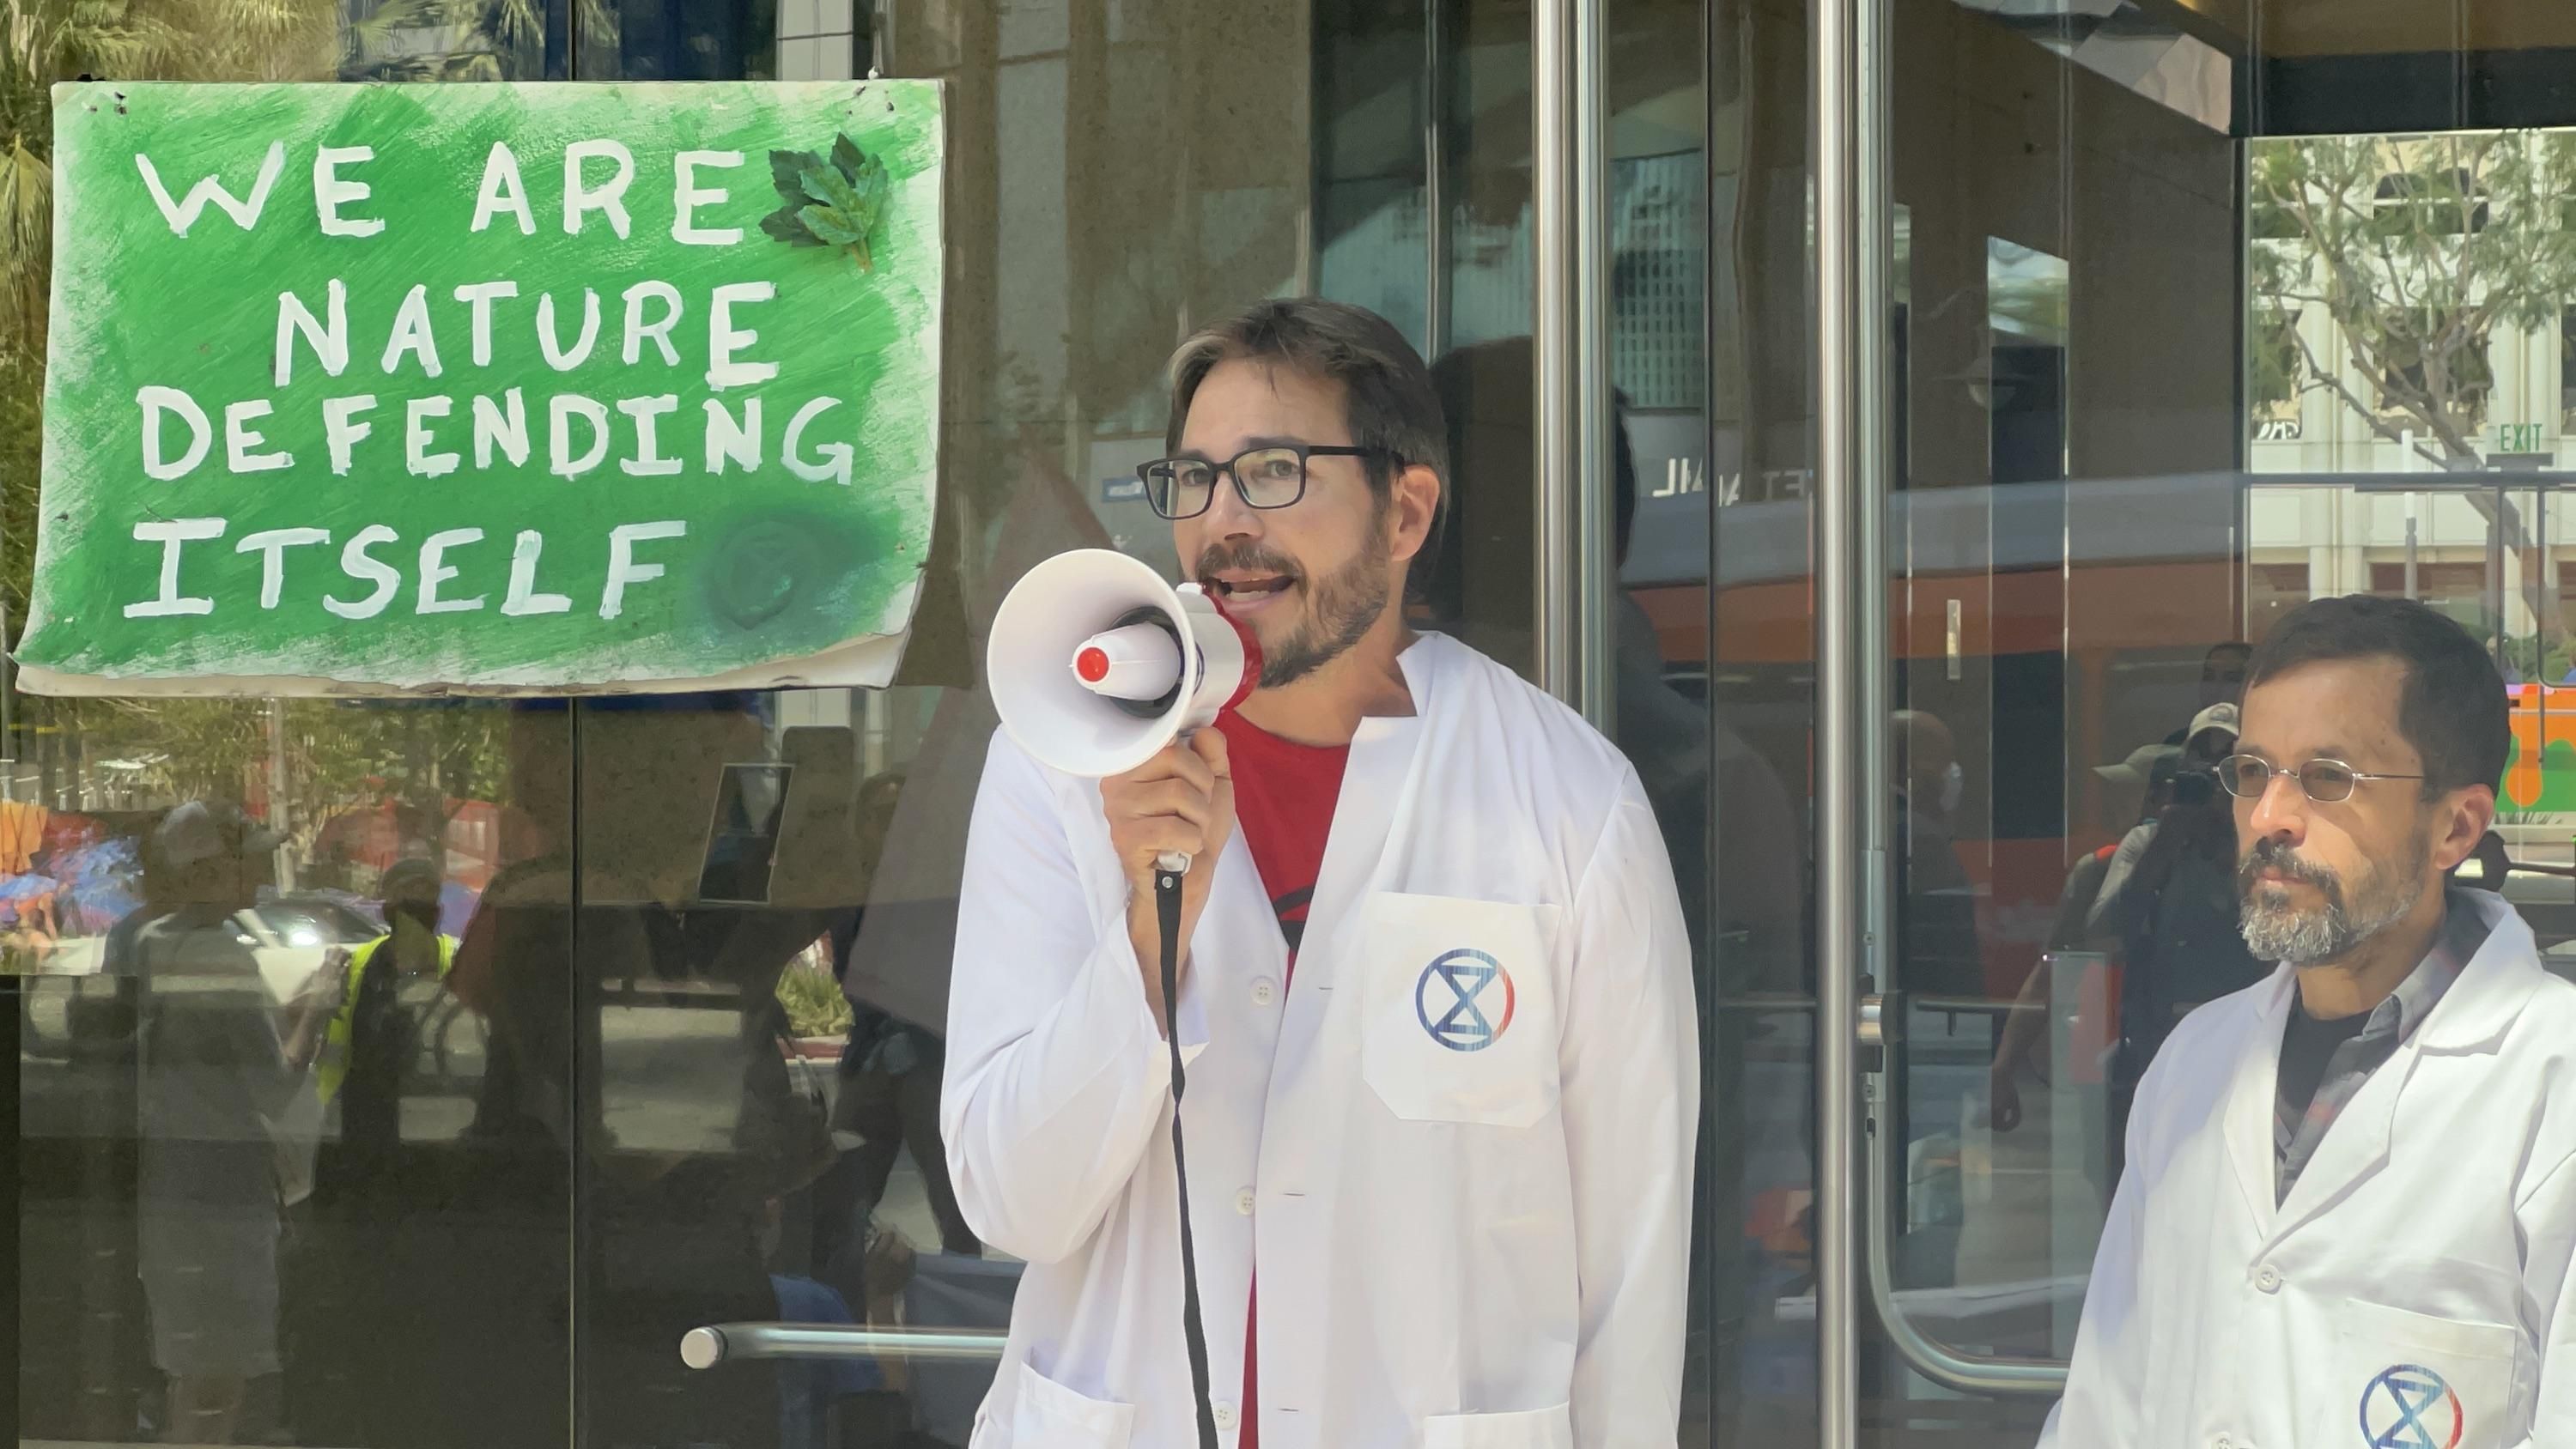  U.S. climate scientist Peter Kalmus is seen outside a JPMorgan Chase building in Los Angeles on April 6, 2022. Along with several others, he locked himself to the front door of the building and was ultimately arrested as they engaged in civil disobedience as part Scientist Rebellion's week of action. (Photo: Scientist Rebellion)